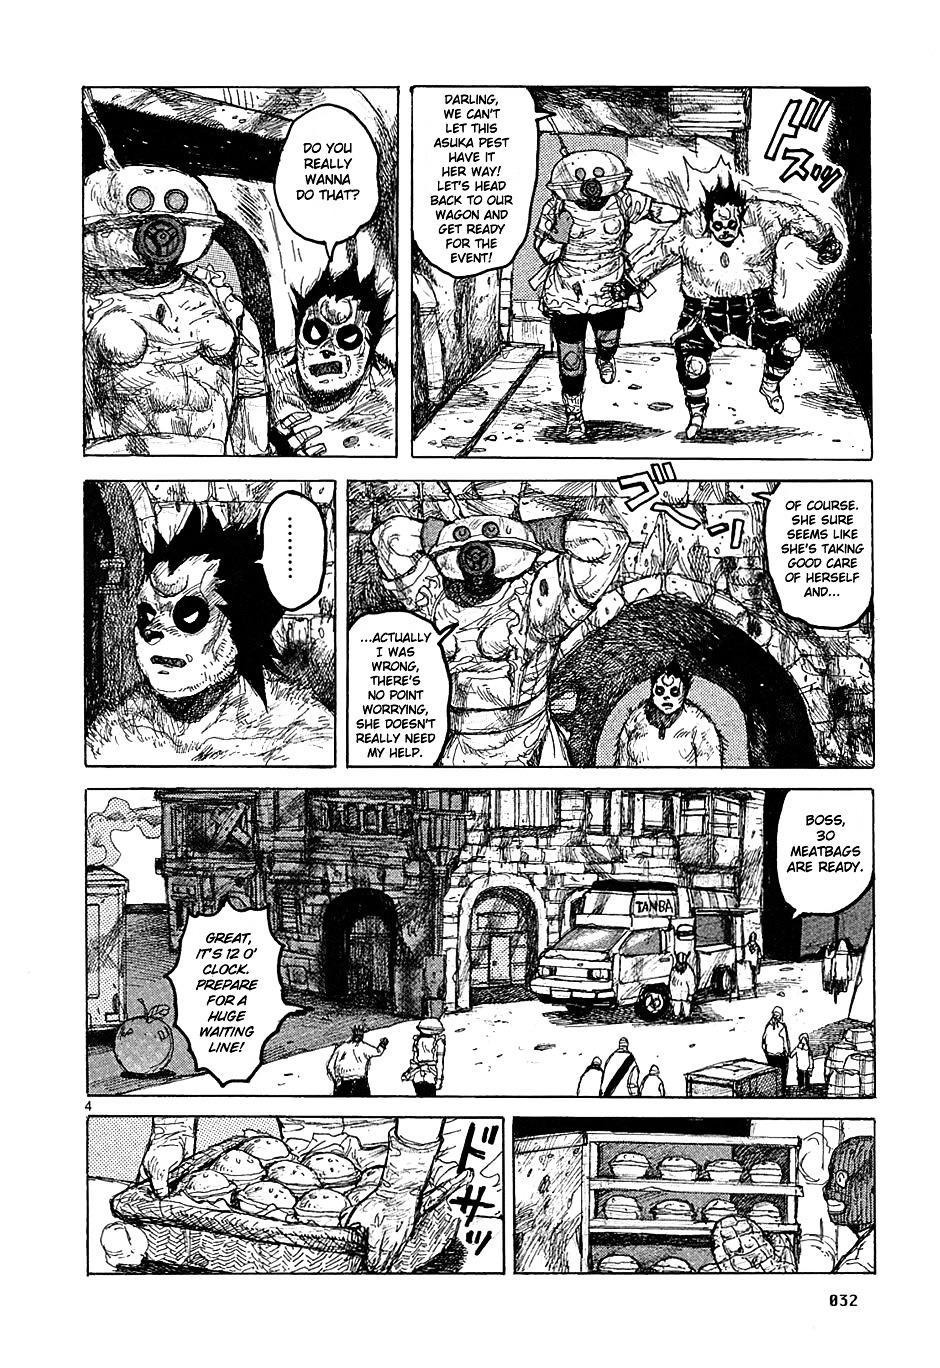 Dorohedoro Chapter 38 : Meatbags Free For All page 4 - Mangakakalot